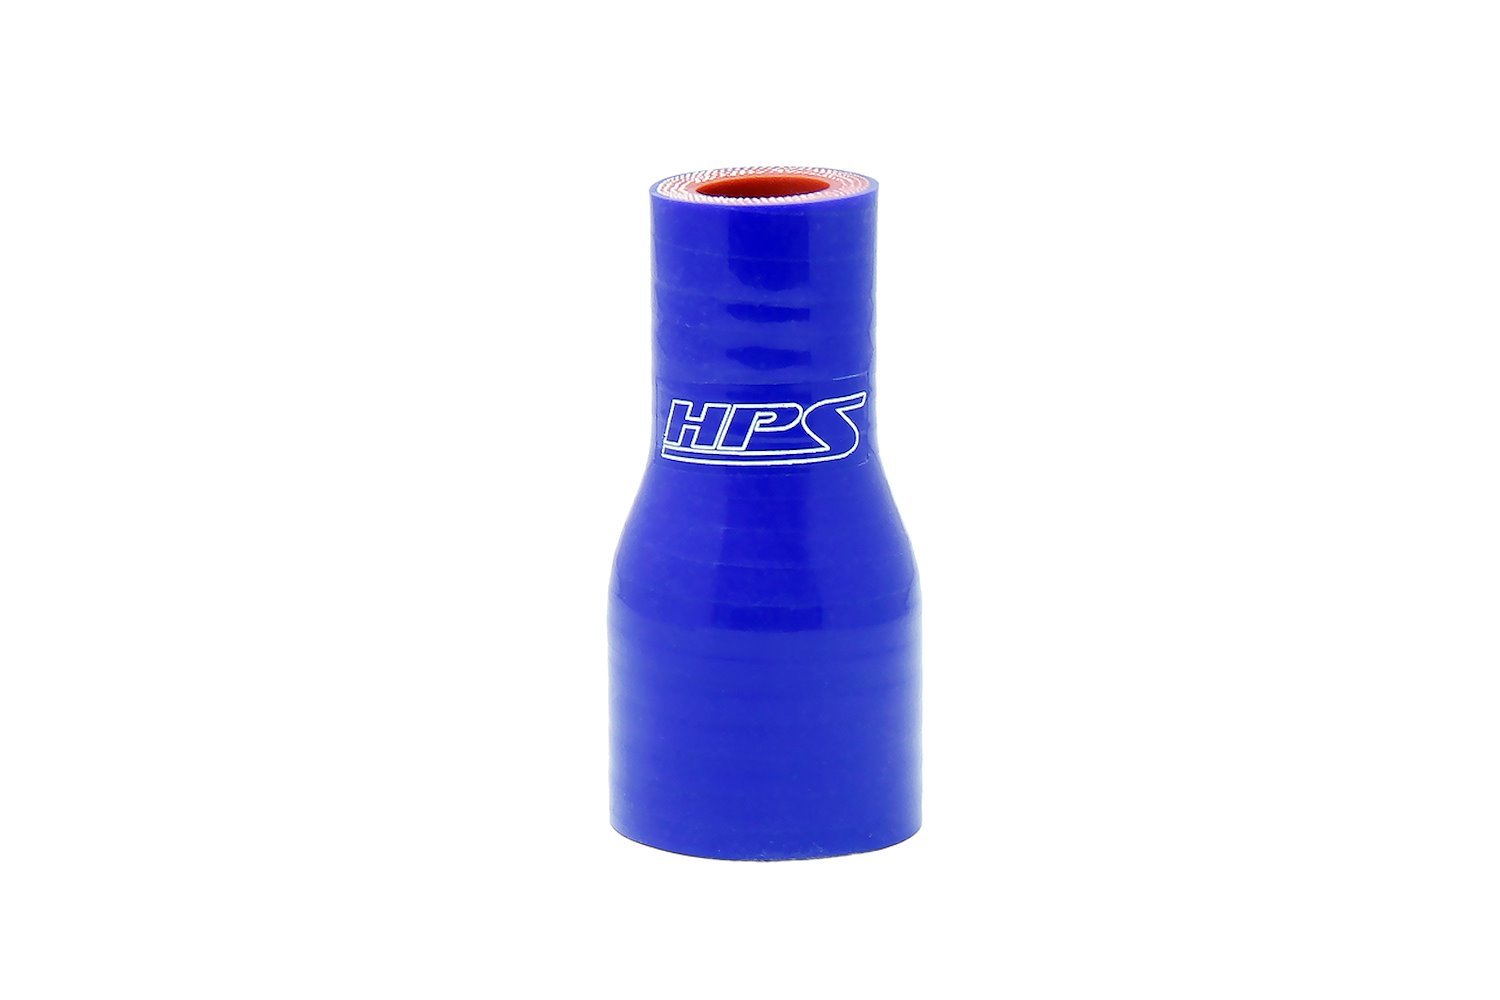 HTSR-138-150-L4-BLUE Silicone Reducer Hose, High-Temp 4-Ply Reinforced, 1-3/8 in. - 1-1/2 in. ID, 4 in. Long, Blue